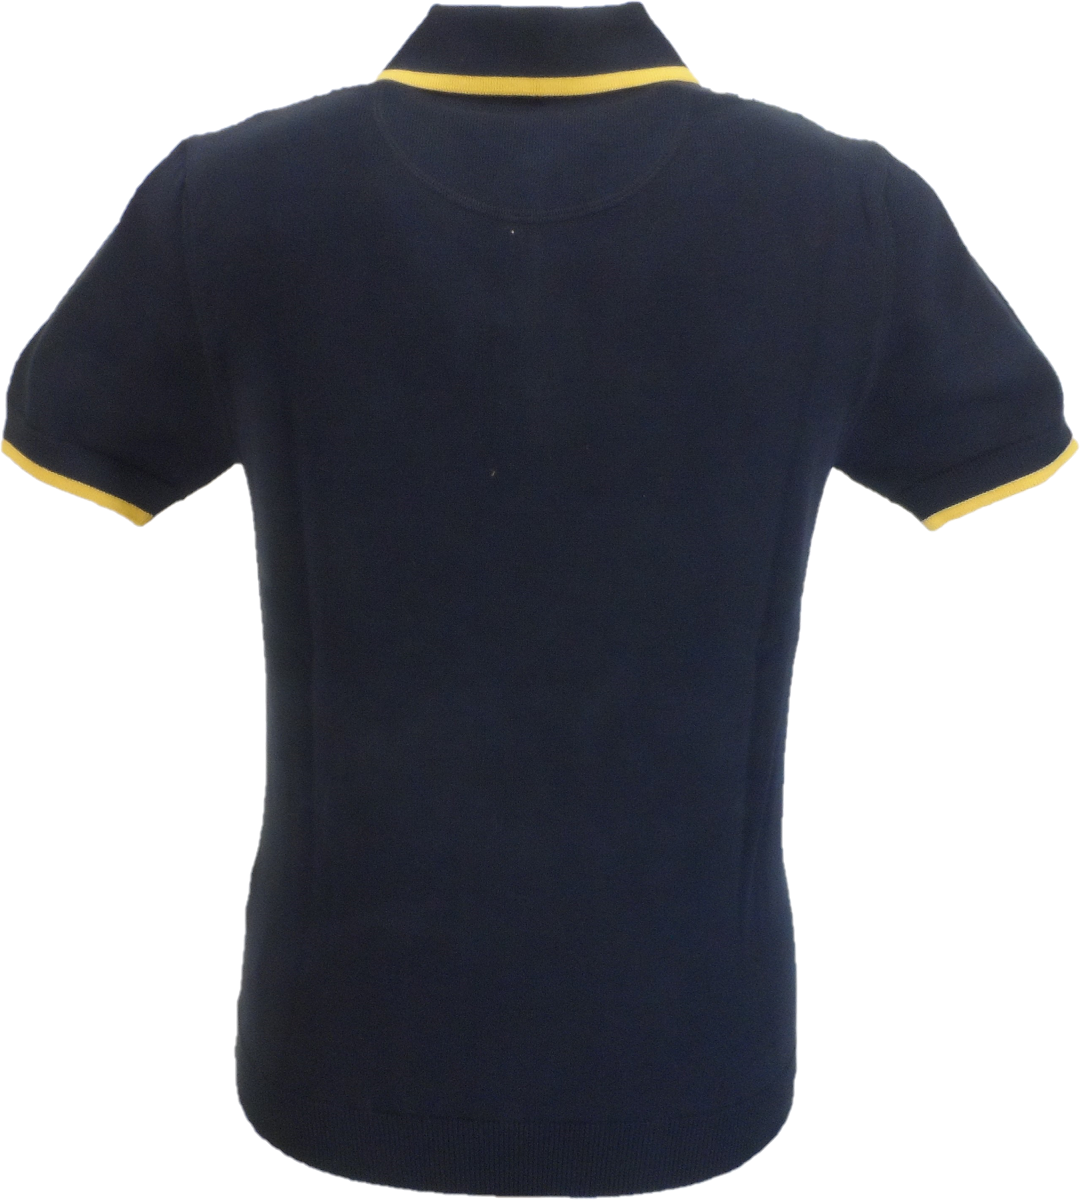 Trojan Records Mens Navy Blue Striped Zipped Knitted Polo Shirt